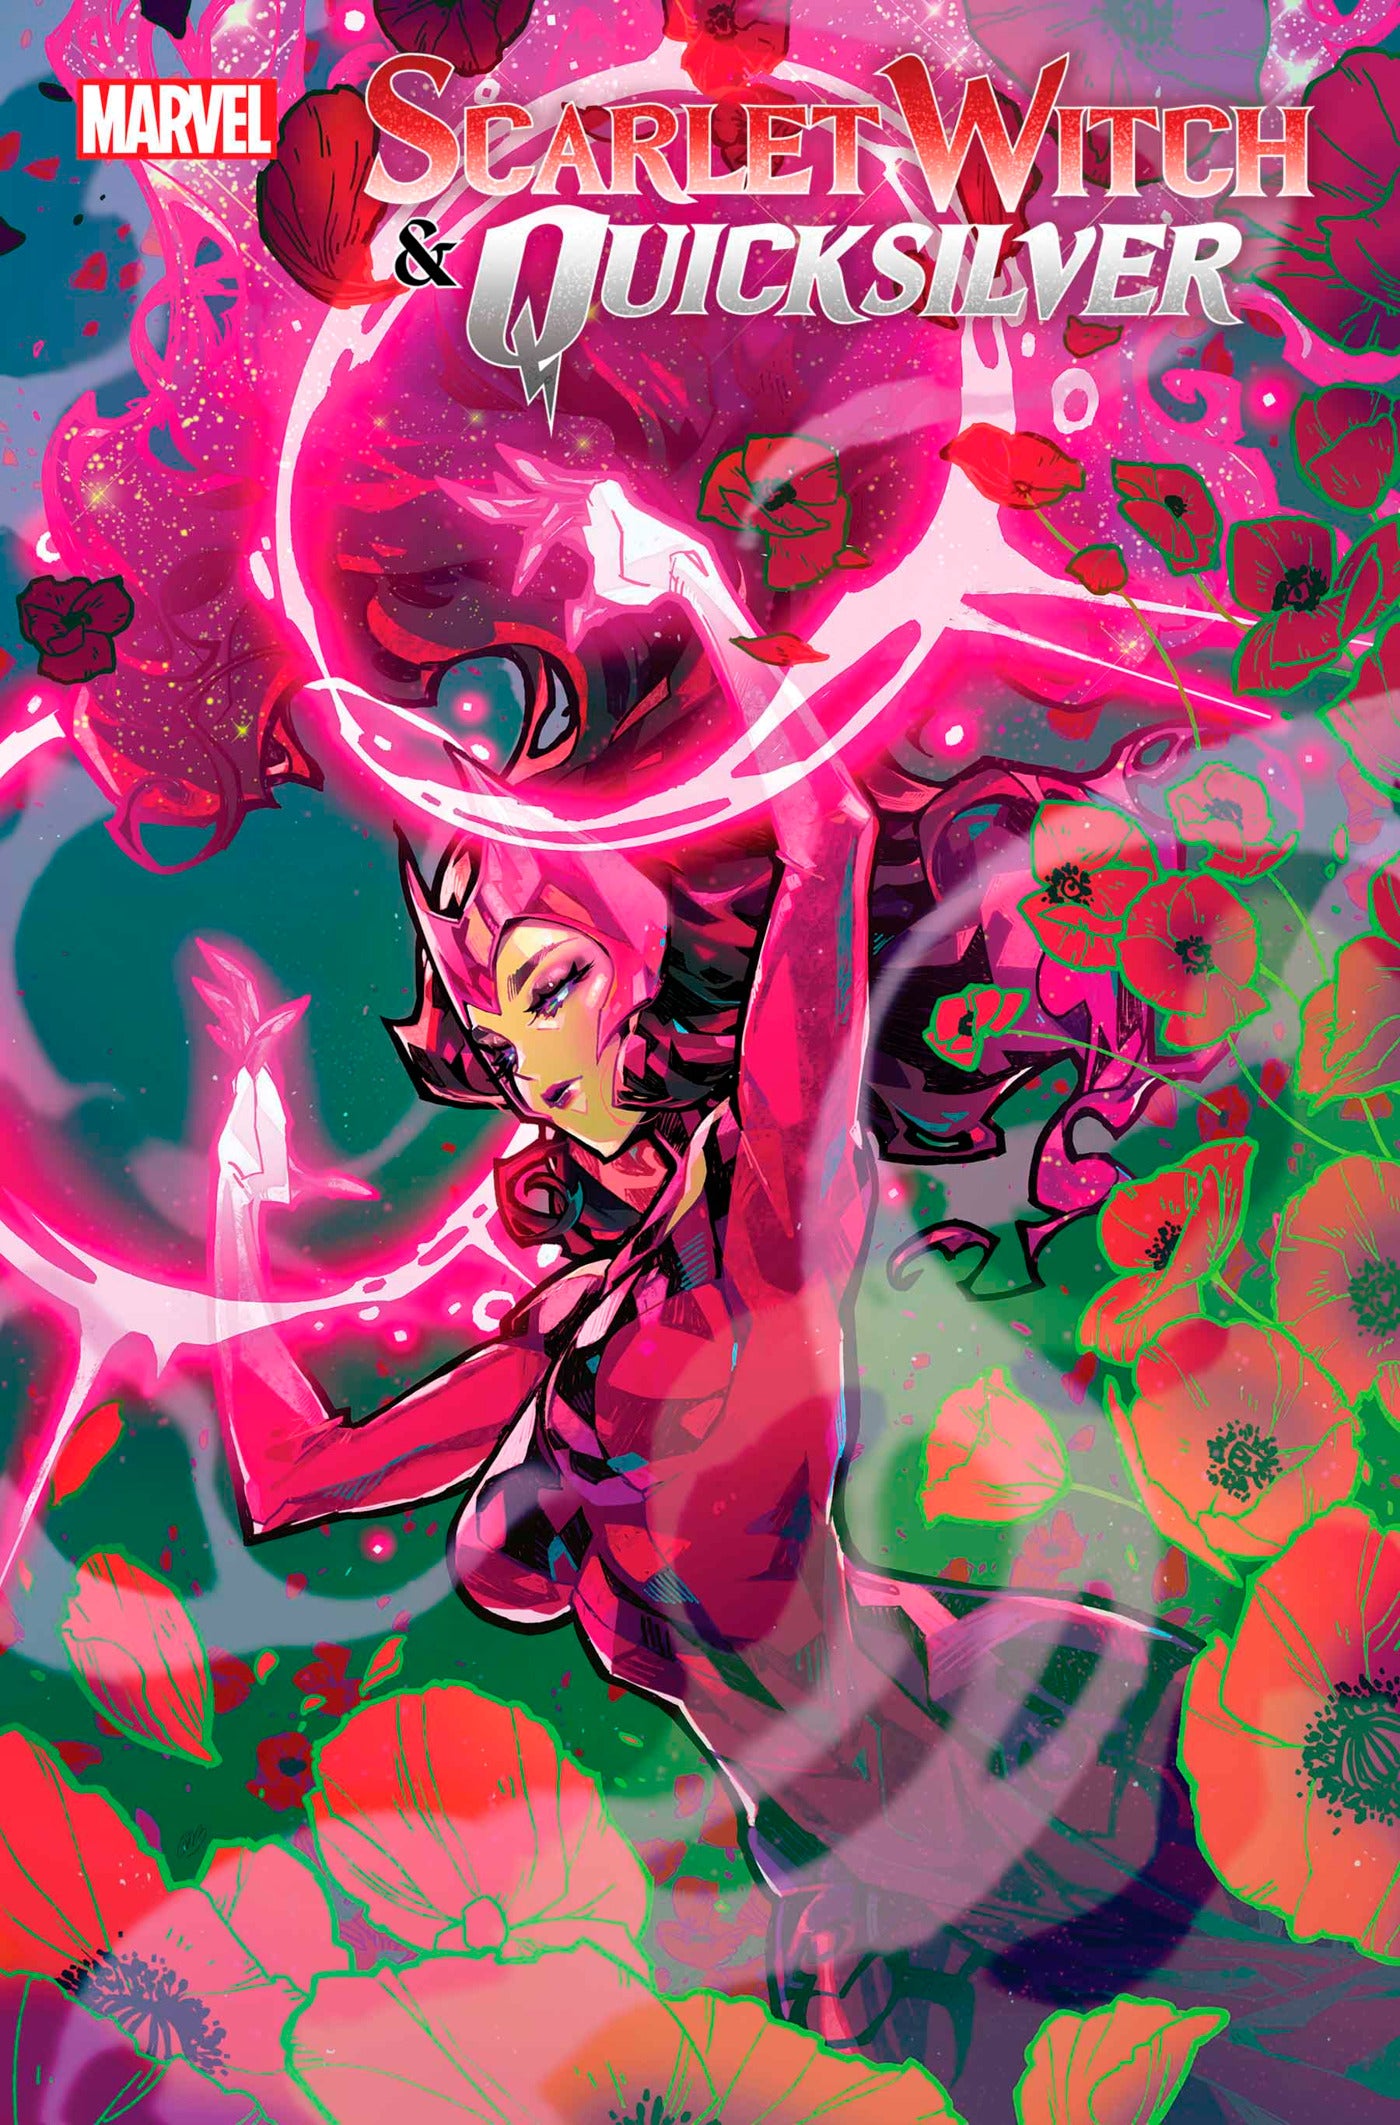 Scarlet Witch #7 Preview - The Comic Book Dispatch